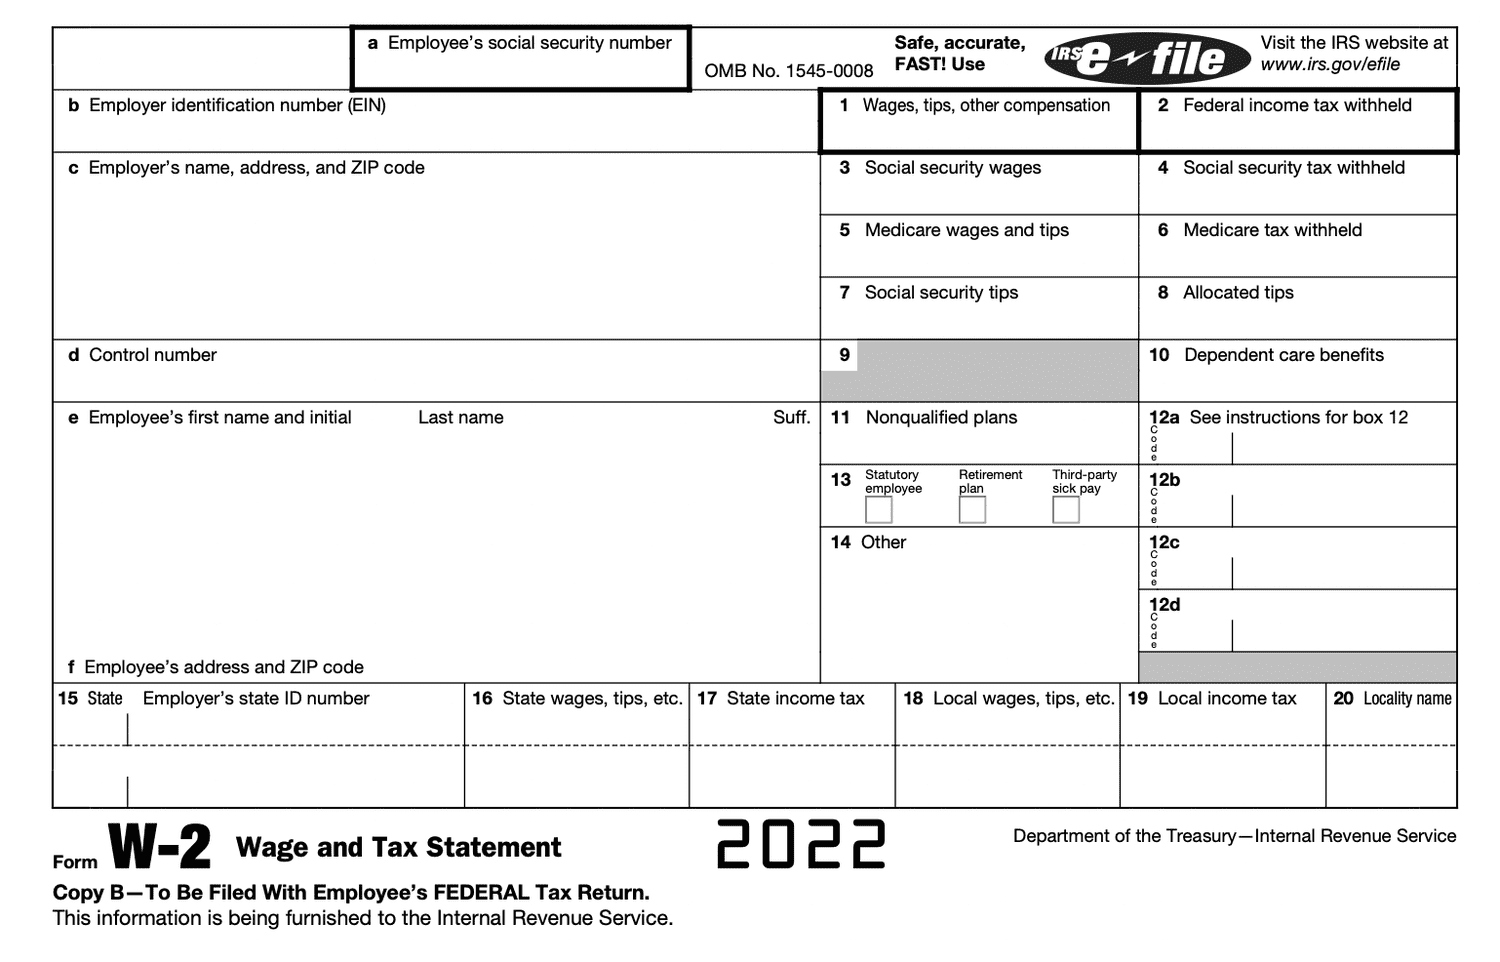 Form W-2 Wage And Tax Statement: What It Is And How To Read It intended for W2 Form Locality Name